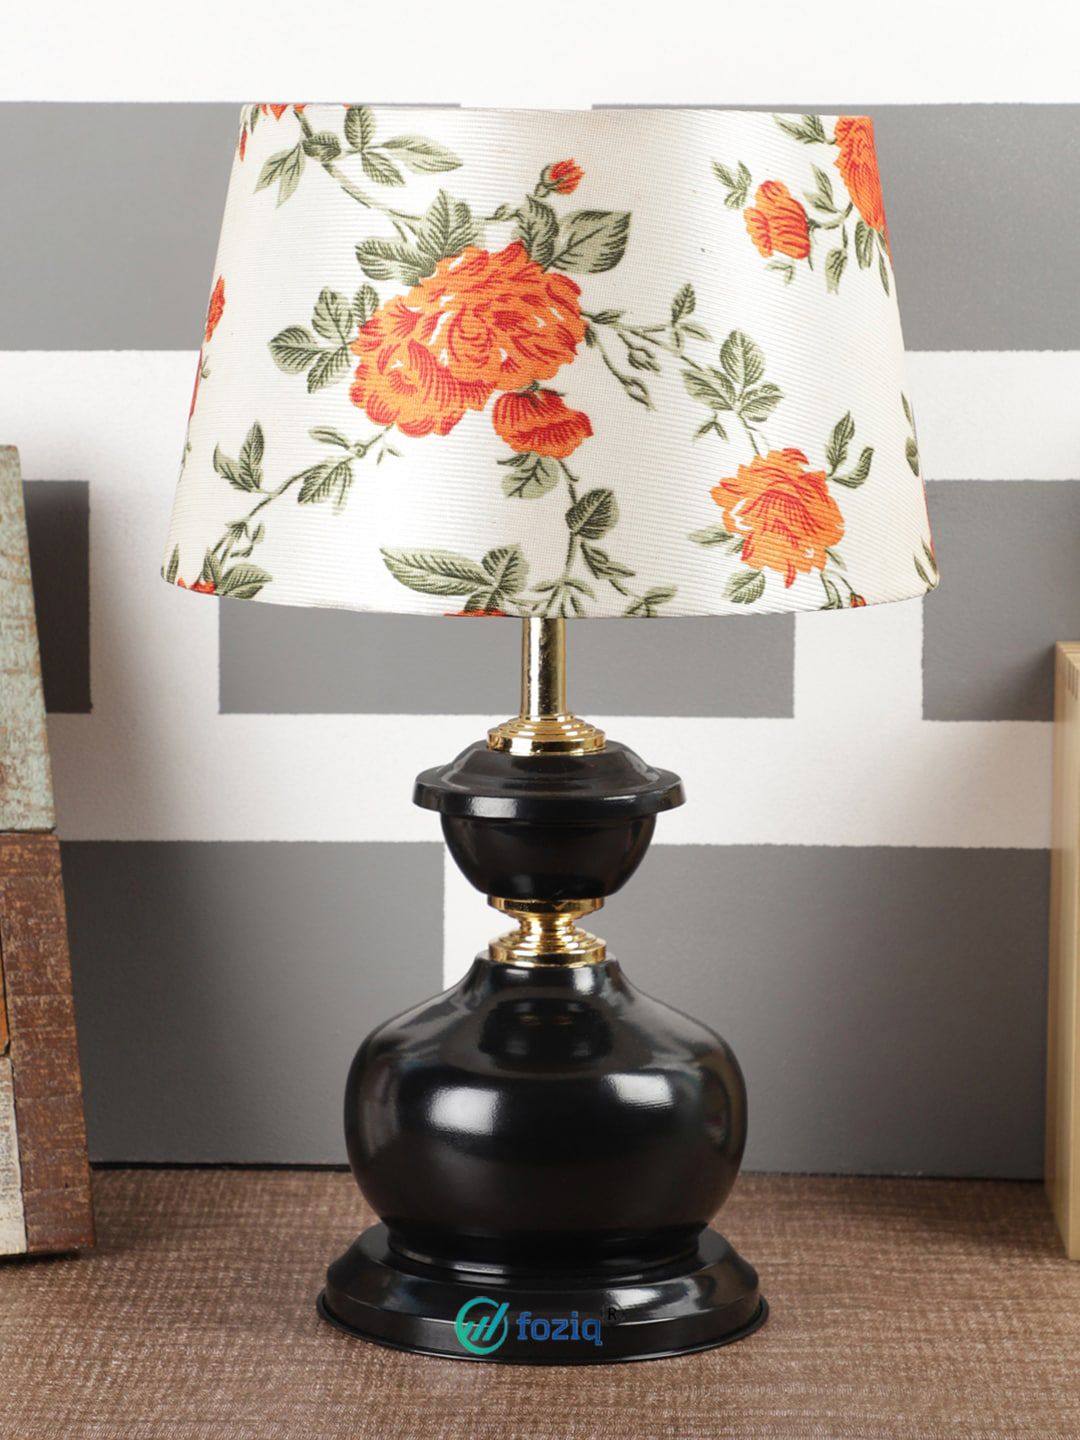 foziq Black & White Floral Printed Table Lamp With Shade Price in India